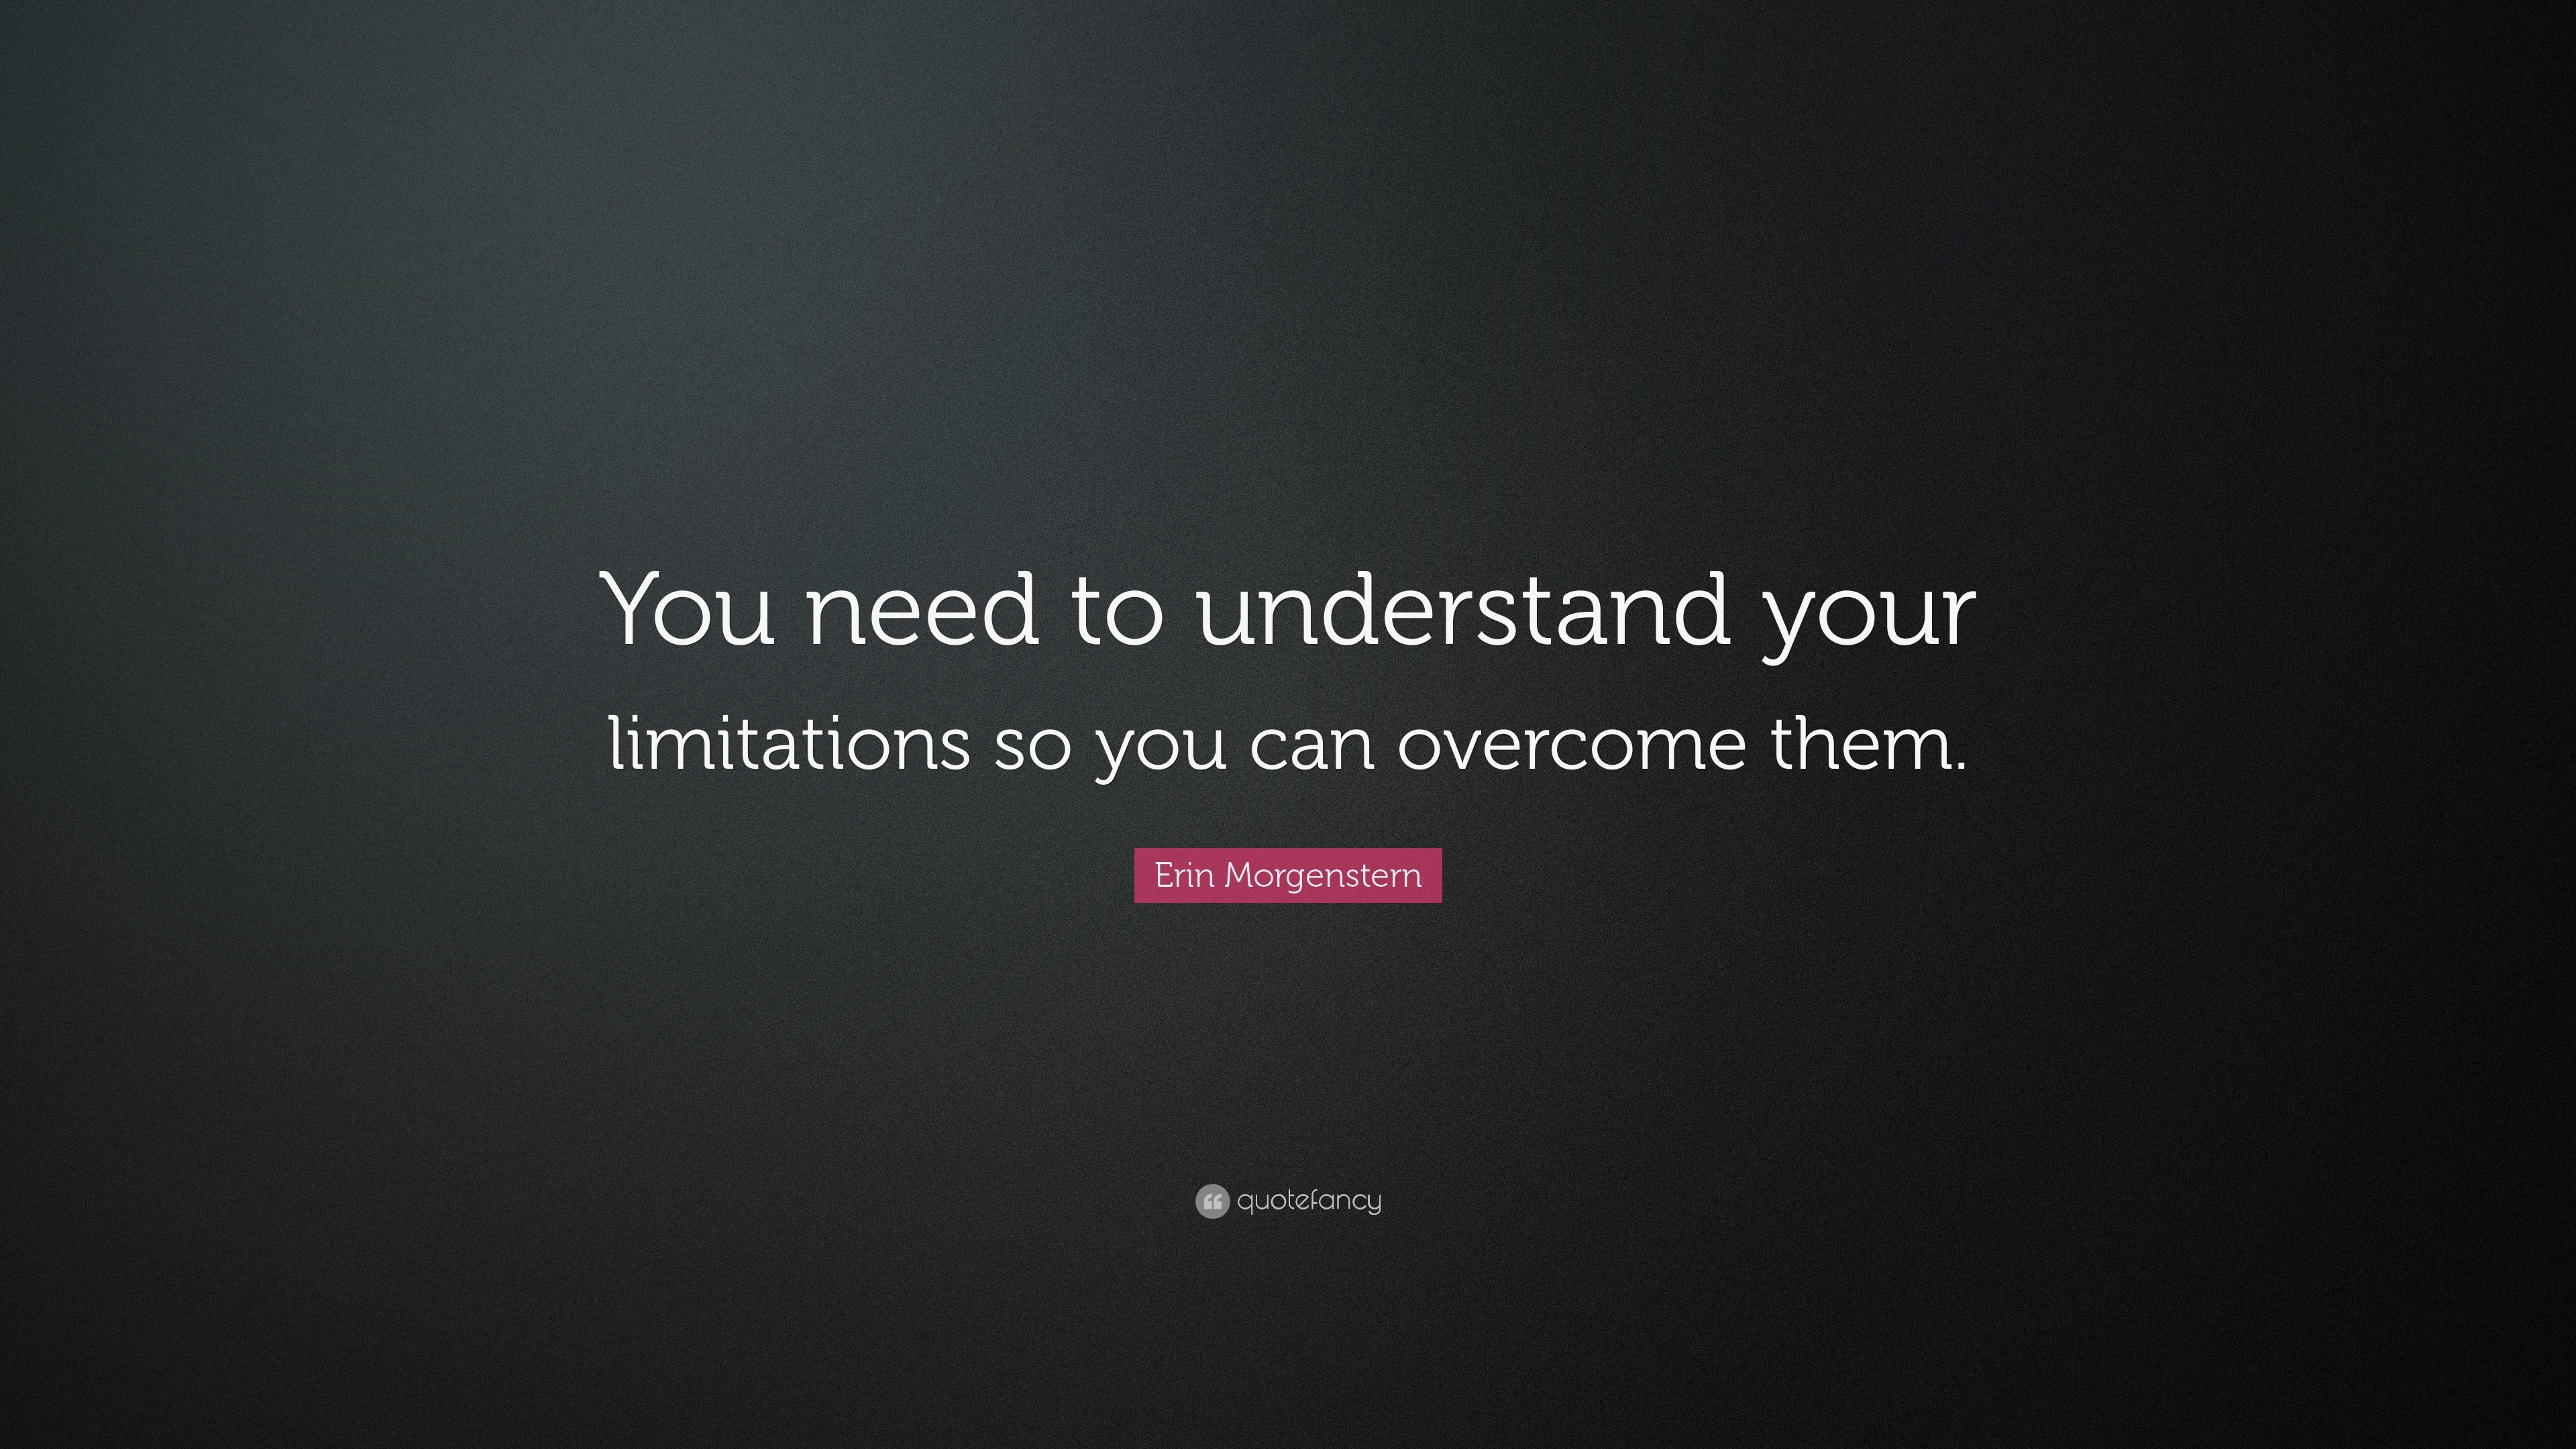 Erin Morgenstern Quote: “You need to understand your limitations so you ...